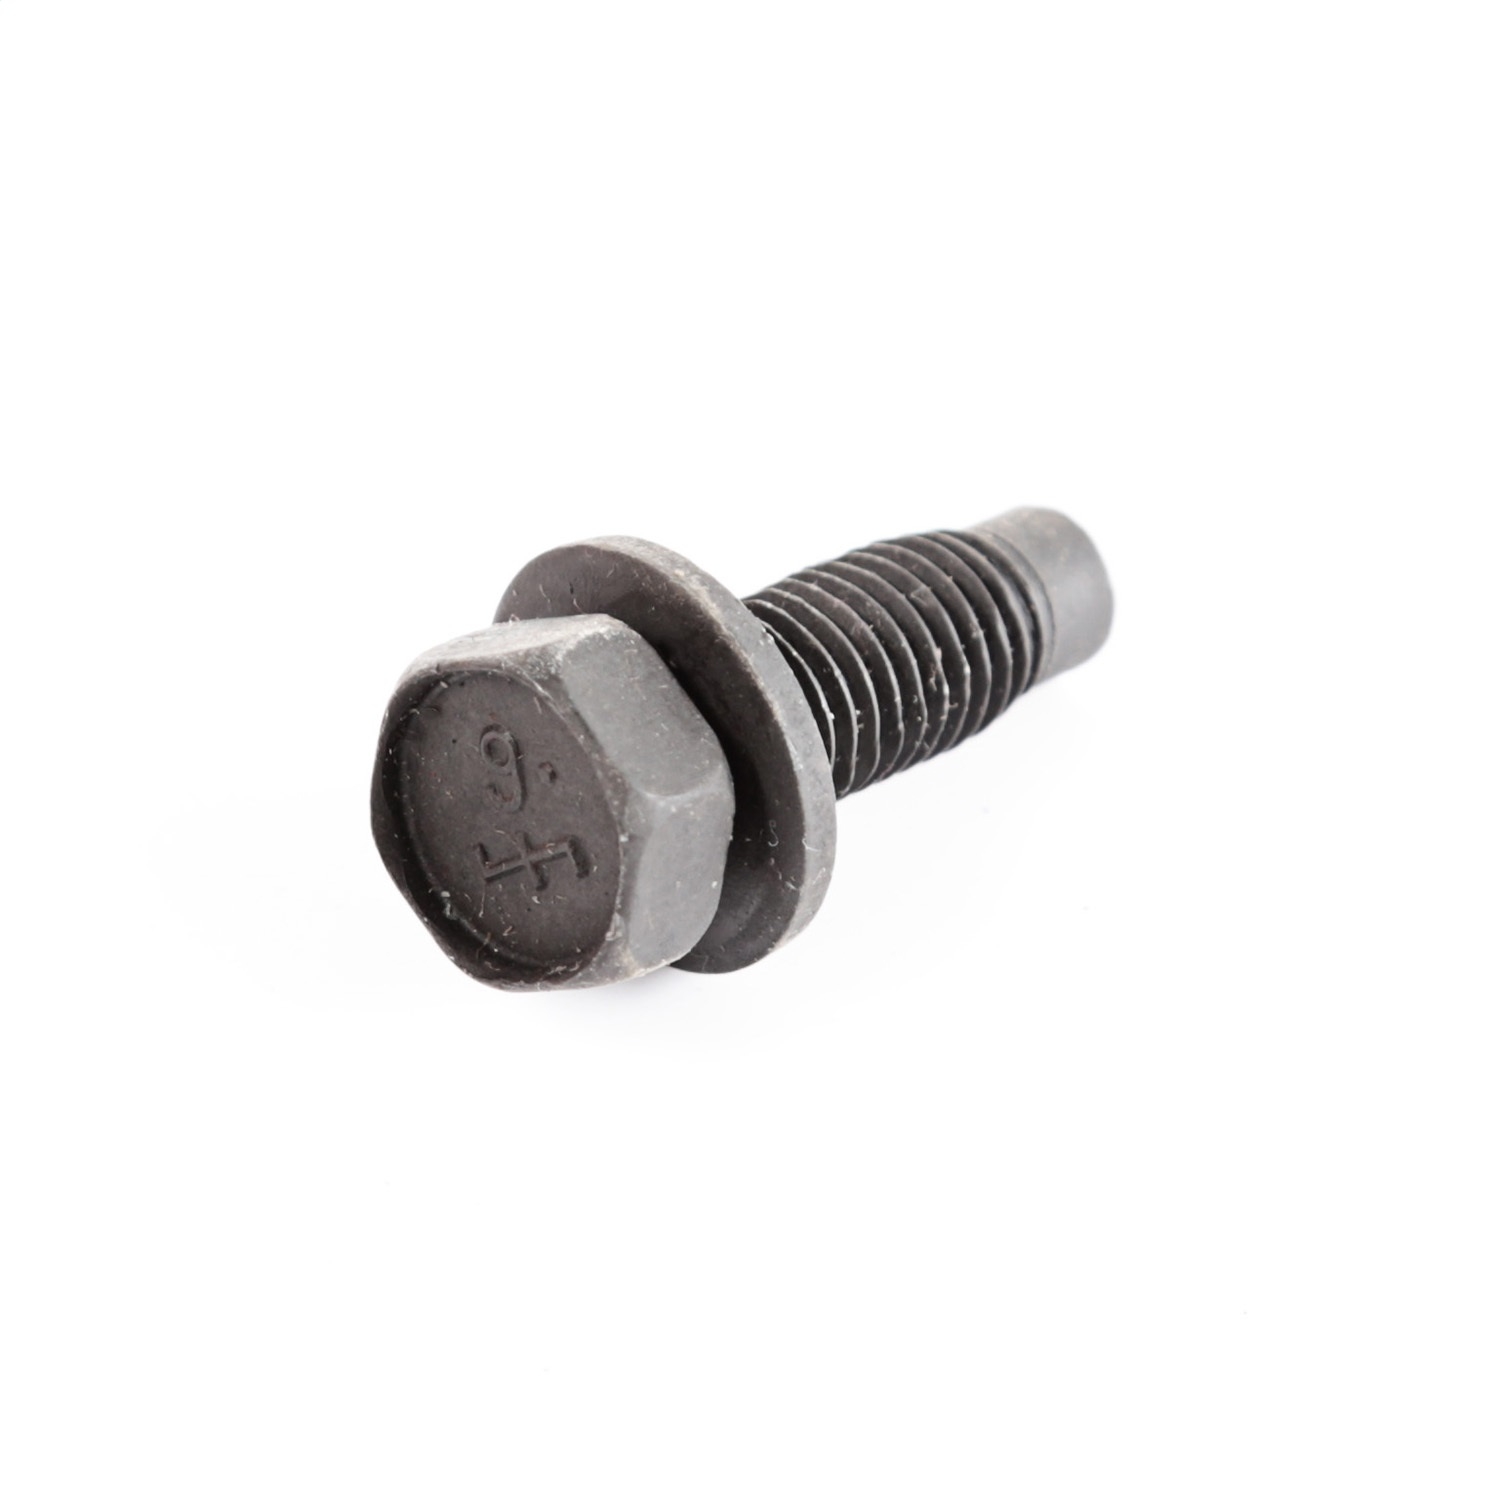 Omix This 30Mm Bolt And Washer Fits Various Assemblies In 84-01 Jeep Cherokee Xj, 86-92 Comanche